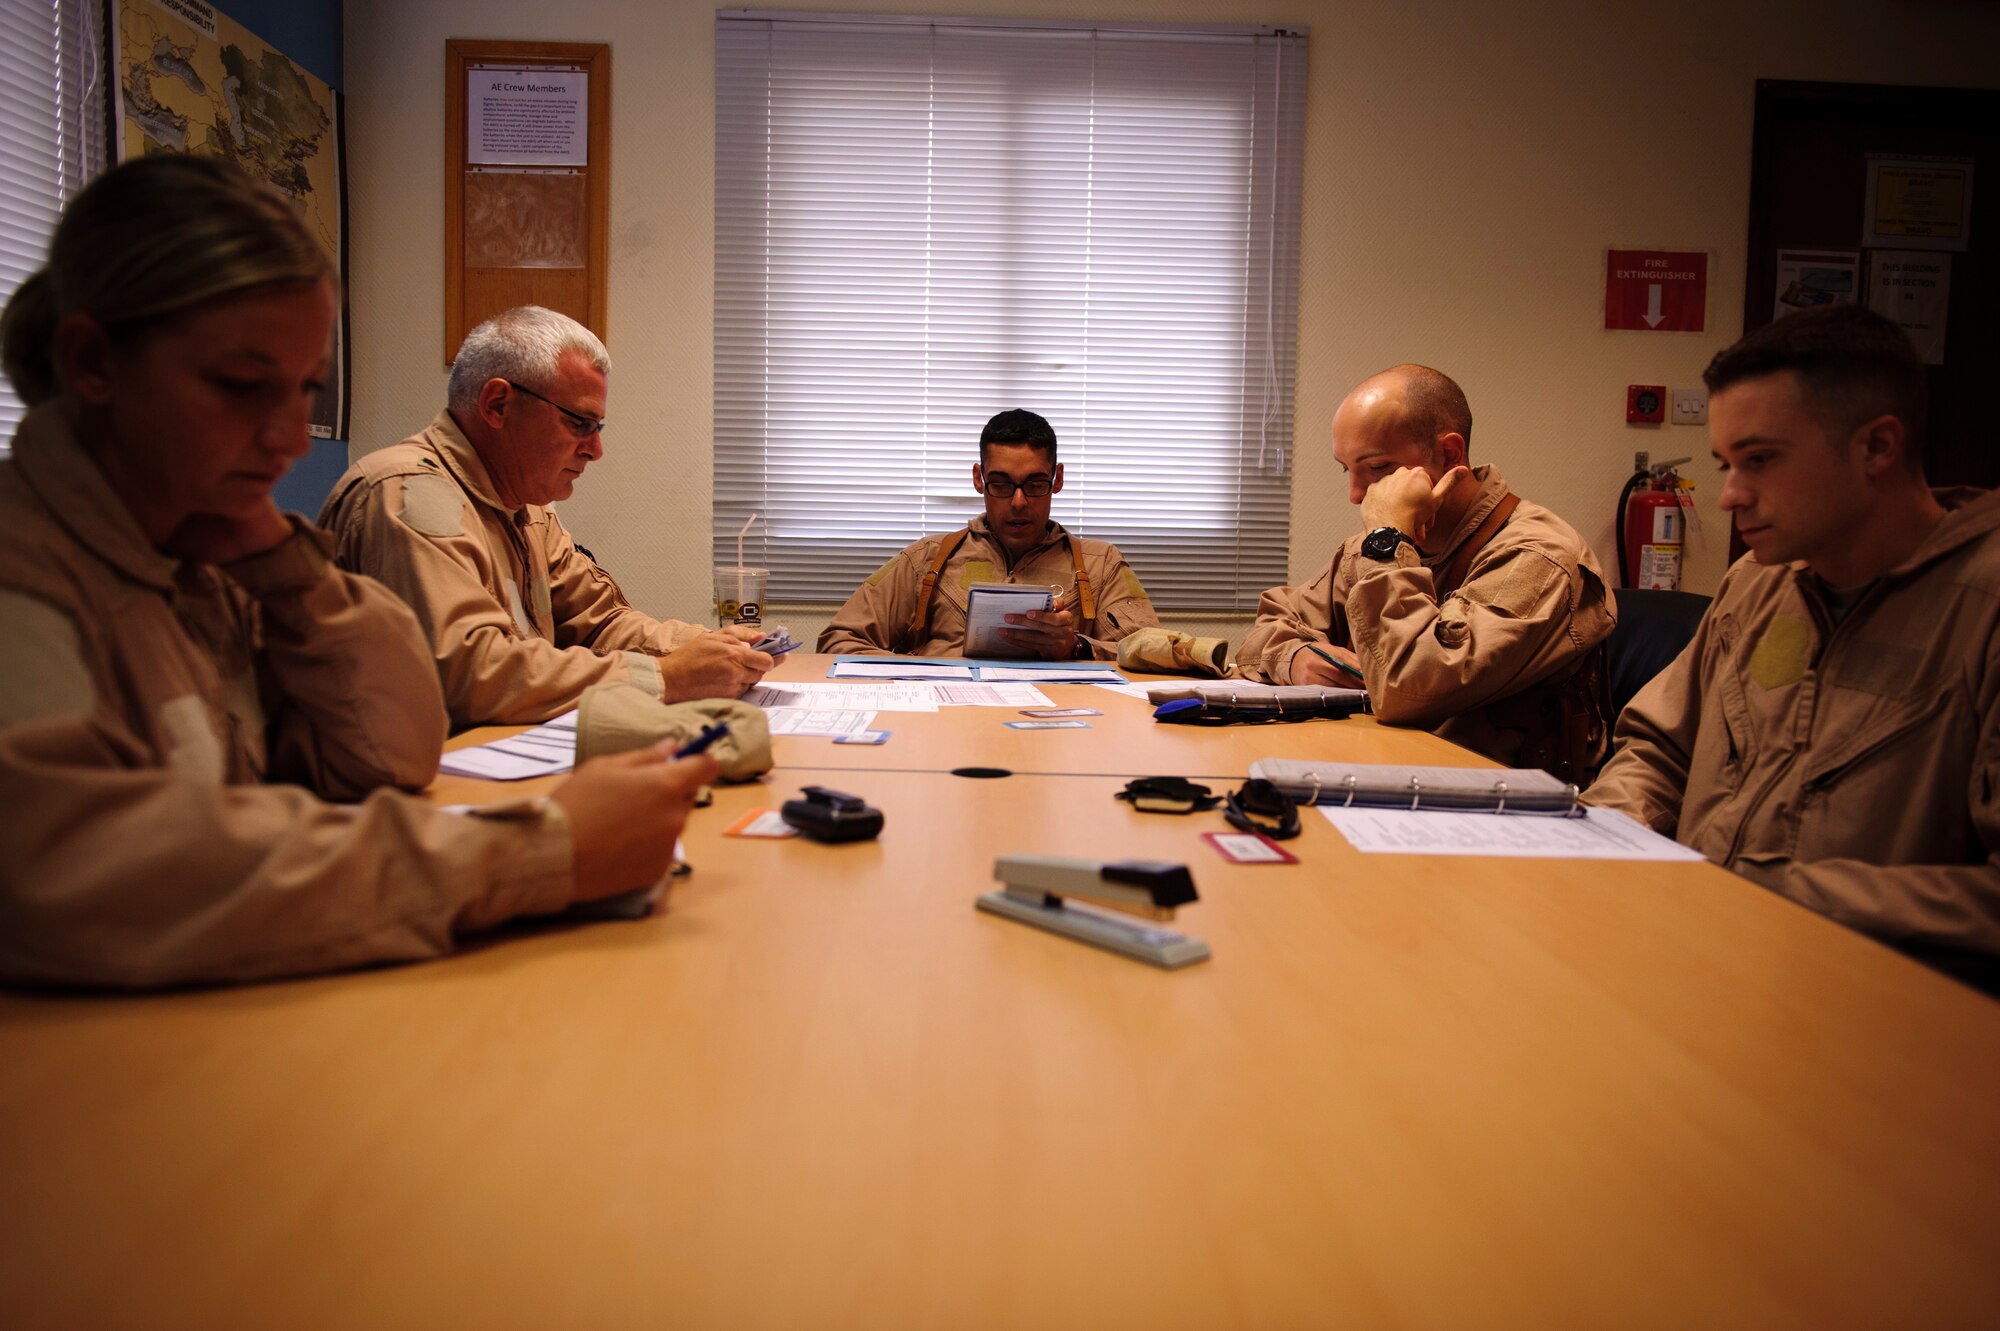 SOUTHWEST ASIA – Members of the 379th Expeditionary Aeromedical Evacuation Squadron review medical records before an evacuation mission here April 21, 2012. The team reviews each patient’s situation before transporting them to or from the battlefield. (U.S. Air Force photo/Staff Sgt. Nathanael Callon)